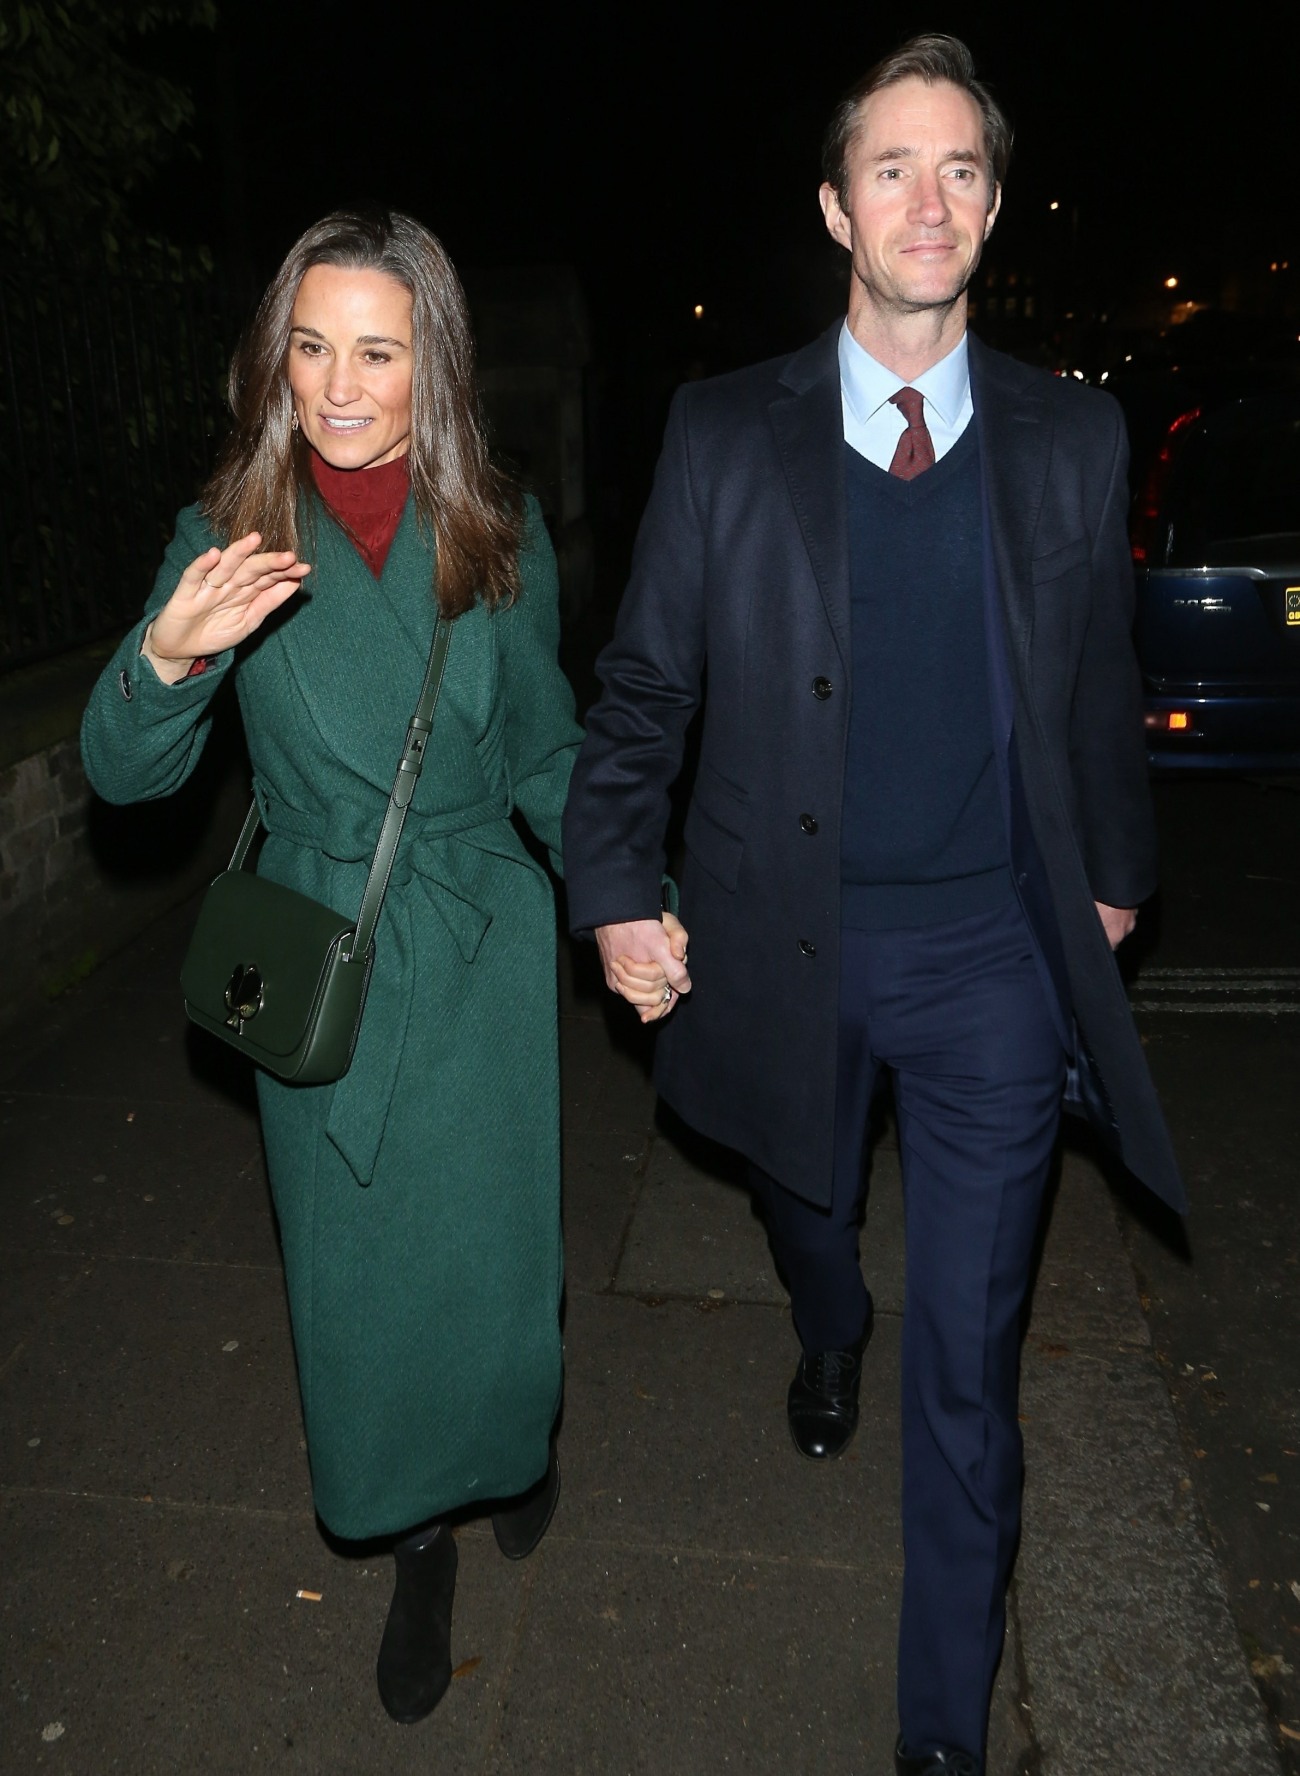 Pippa Middleton and James Matthews leave annual service at St Luke's Church in London